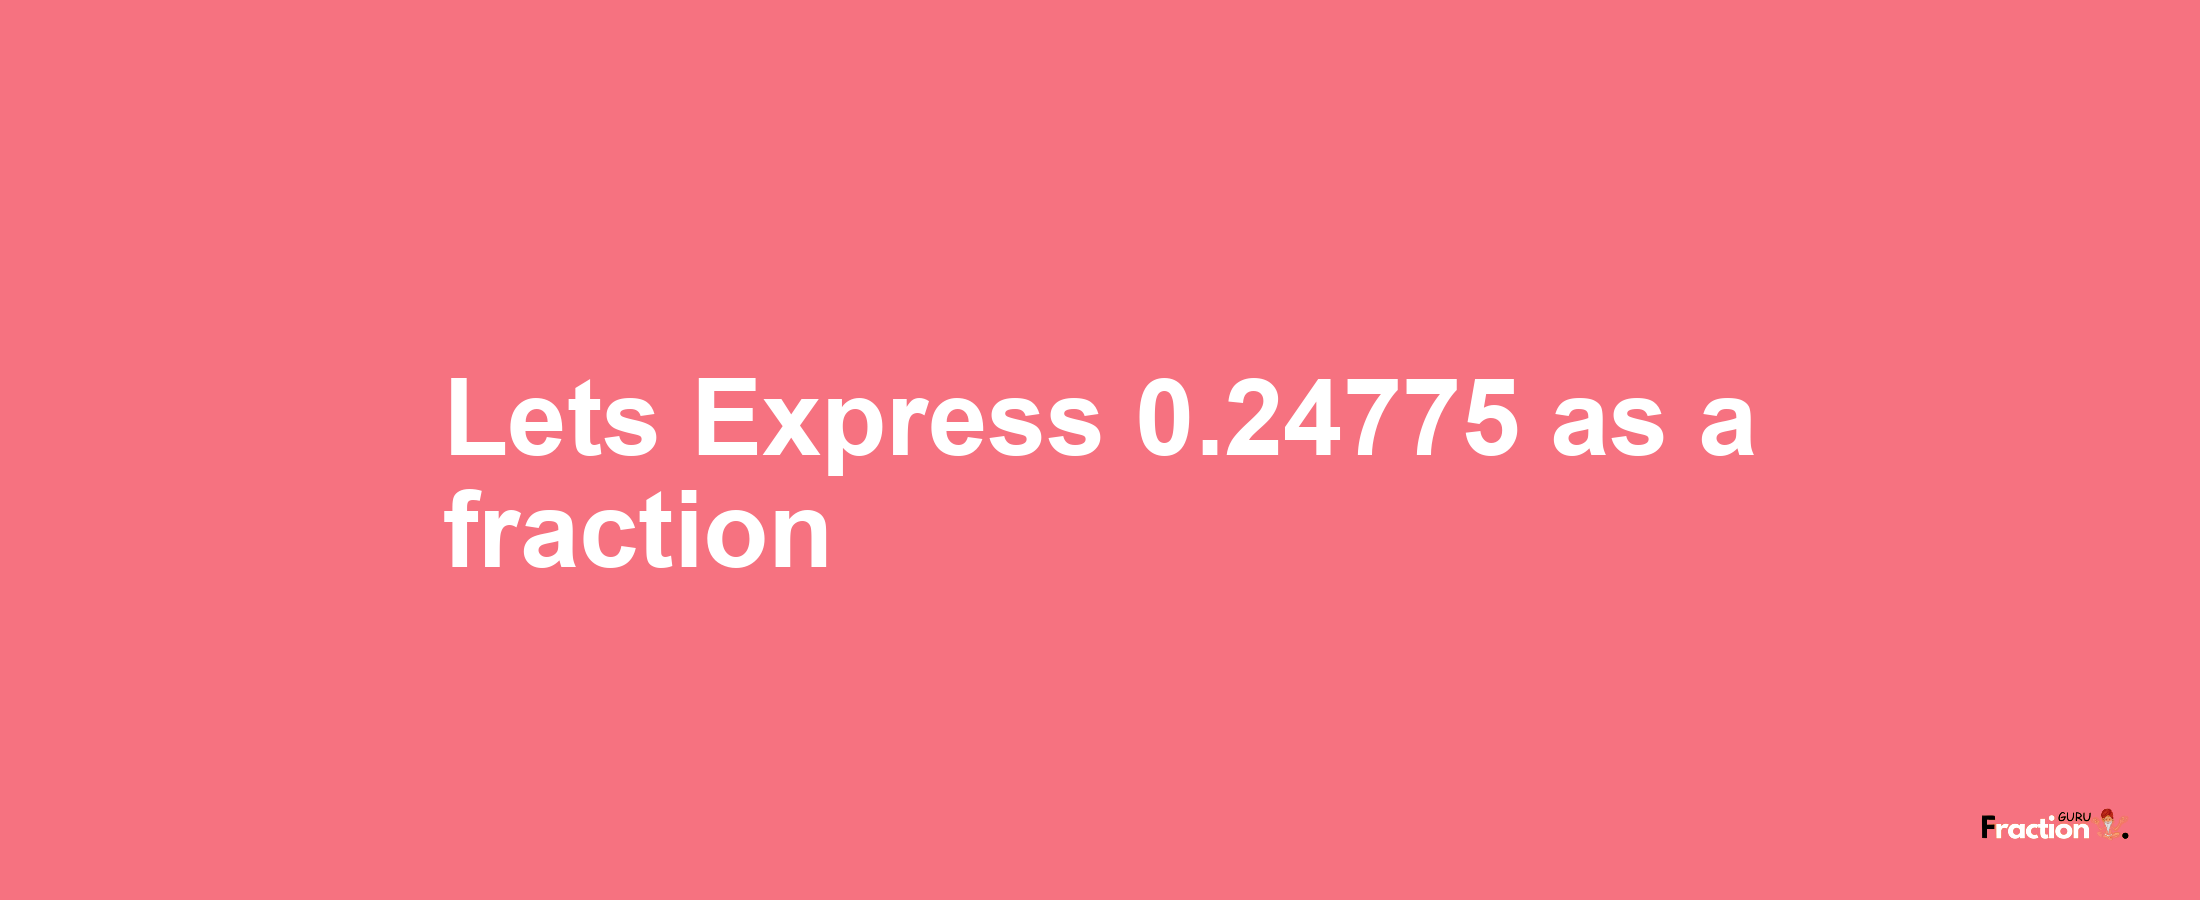 Lets Express 0.24775 as afraction